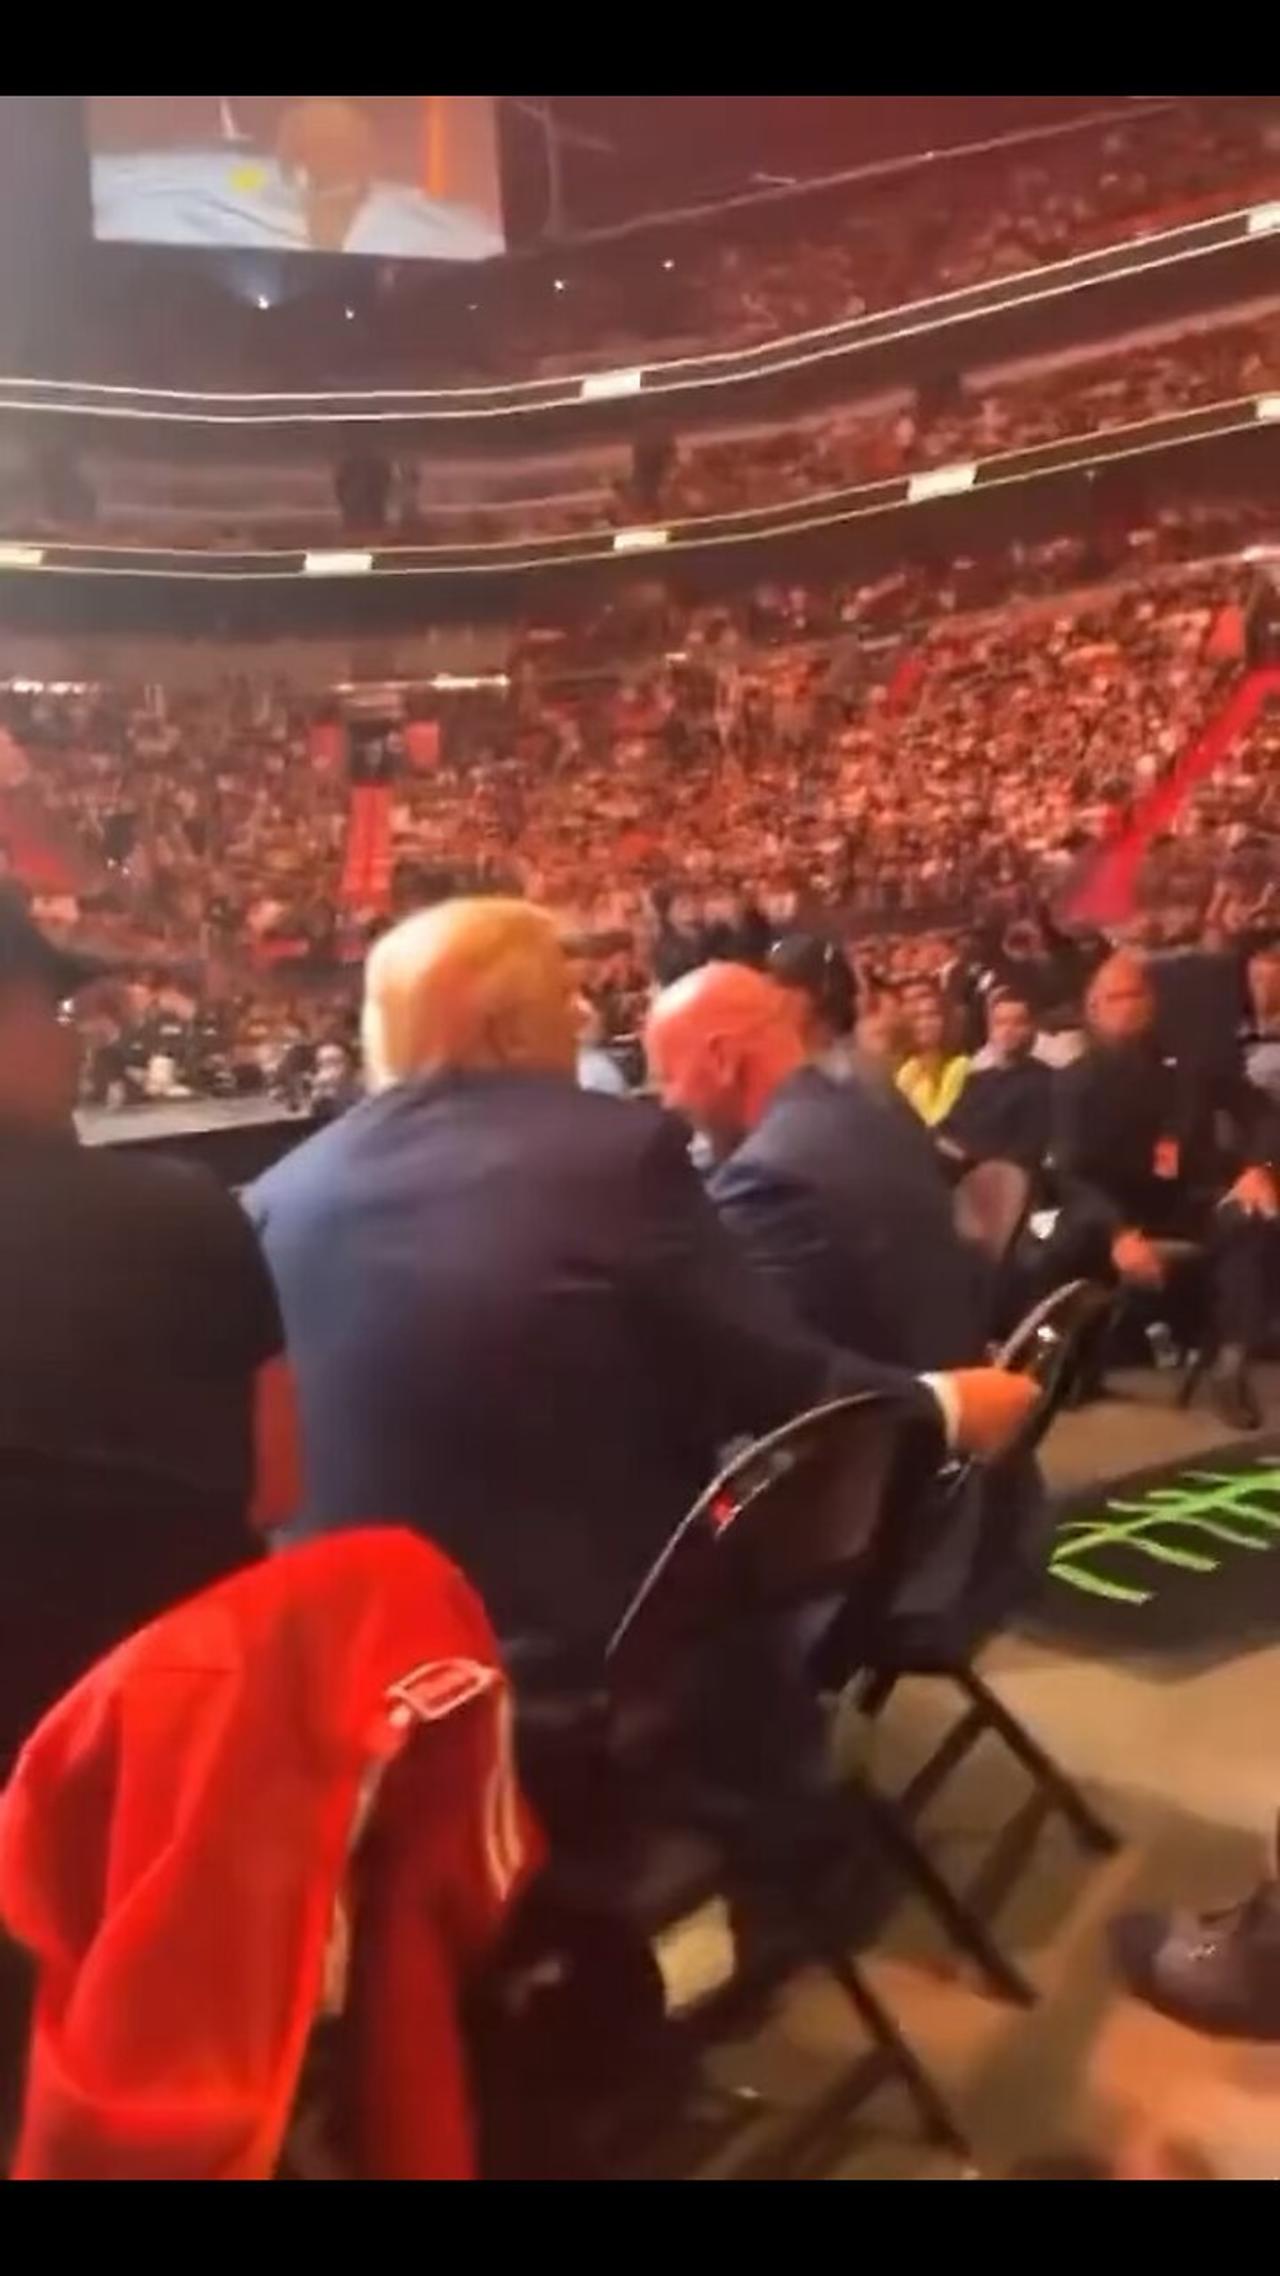 Trump waves at crowd at UFC fight the stadium breaks out in “USA! USA! USA!” chant